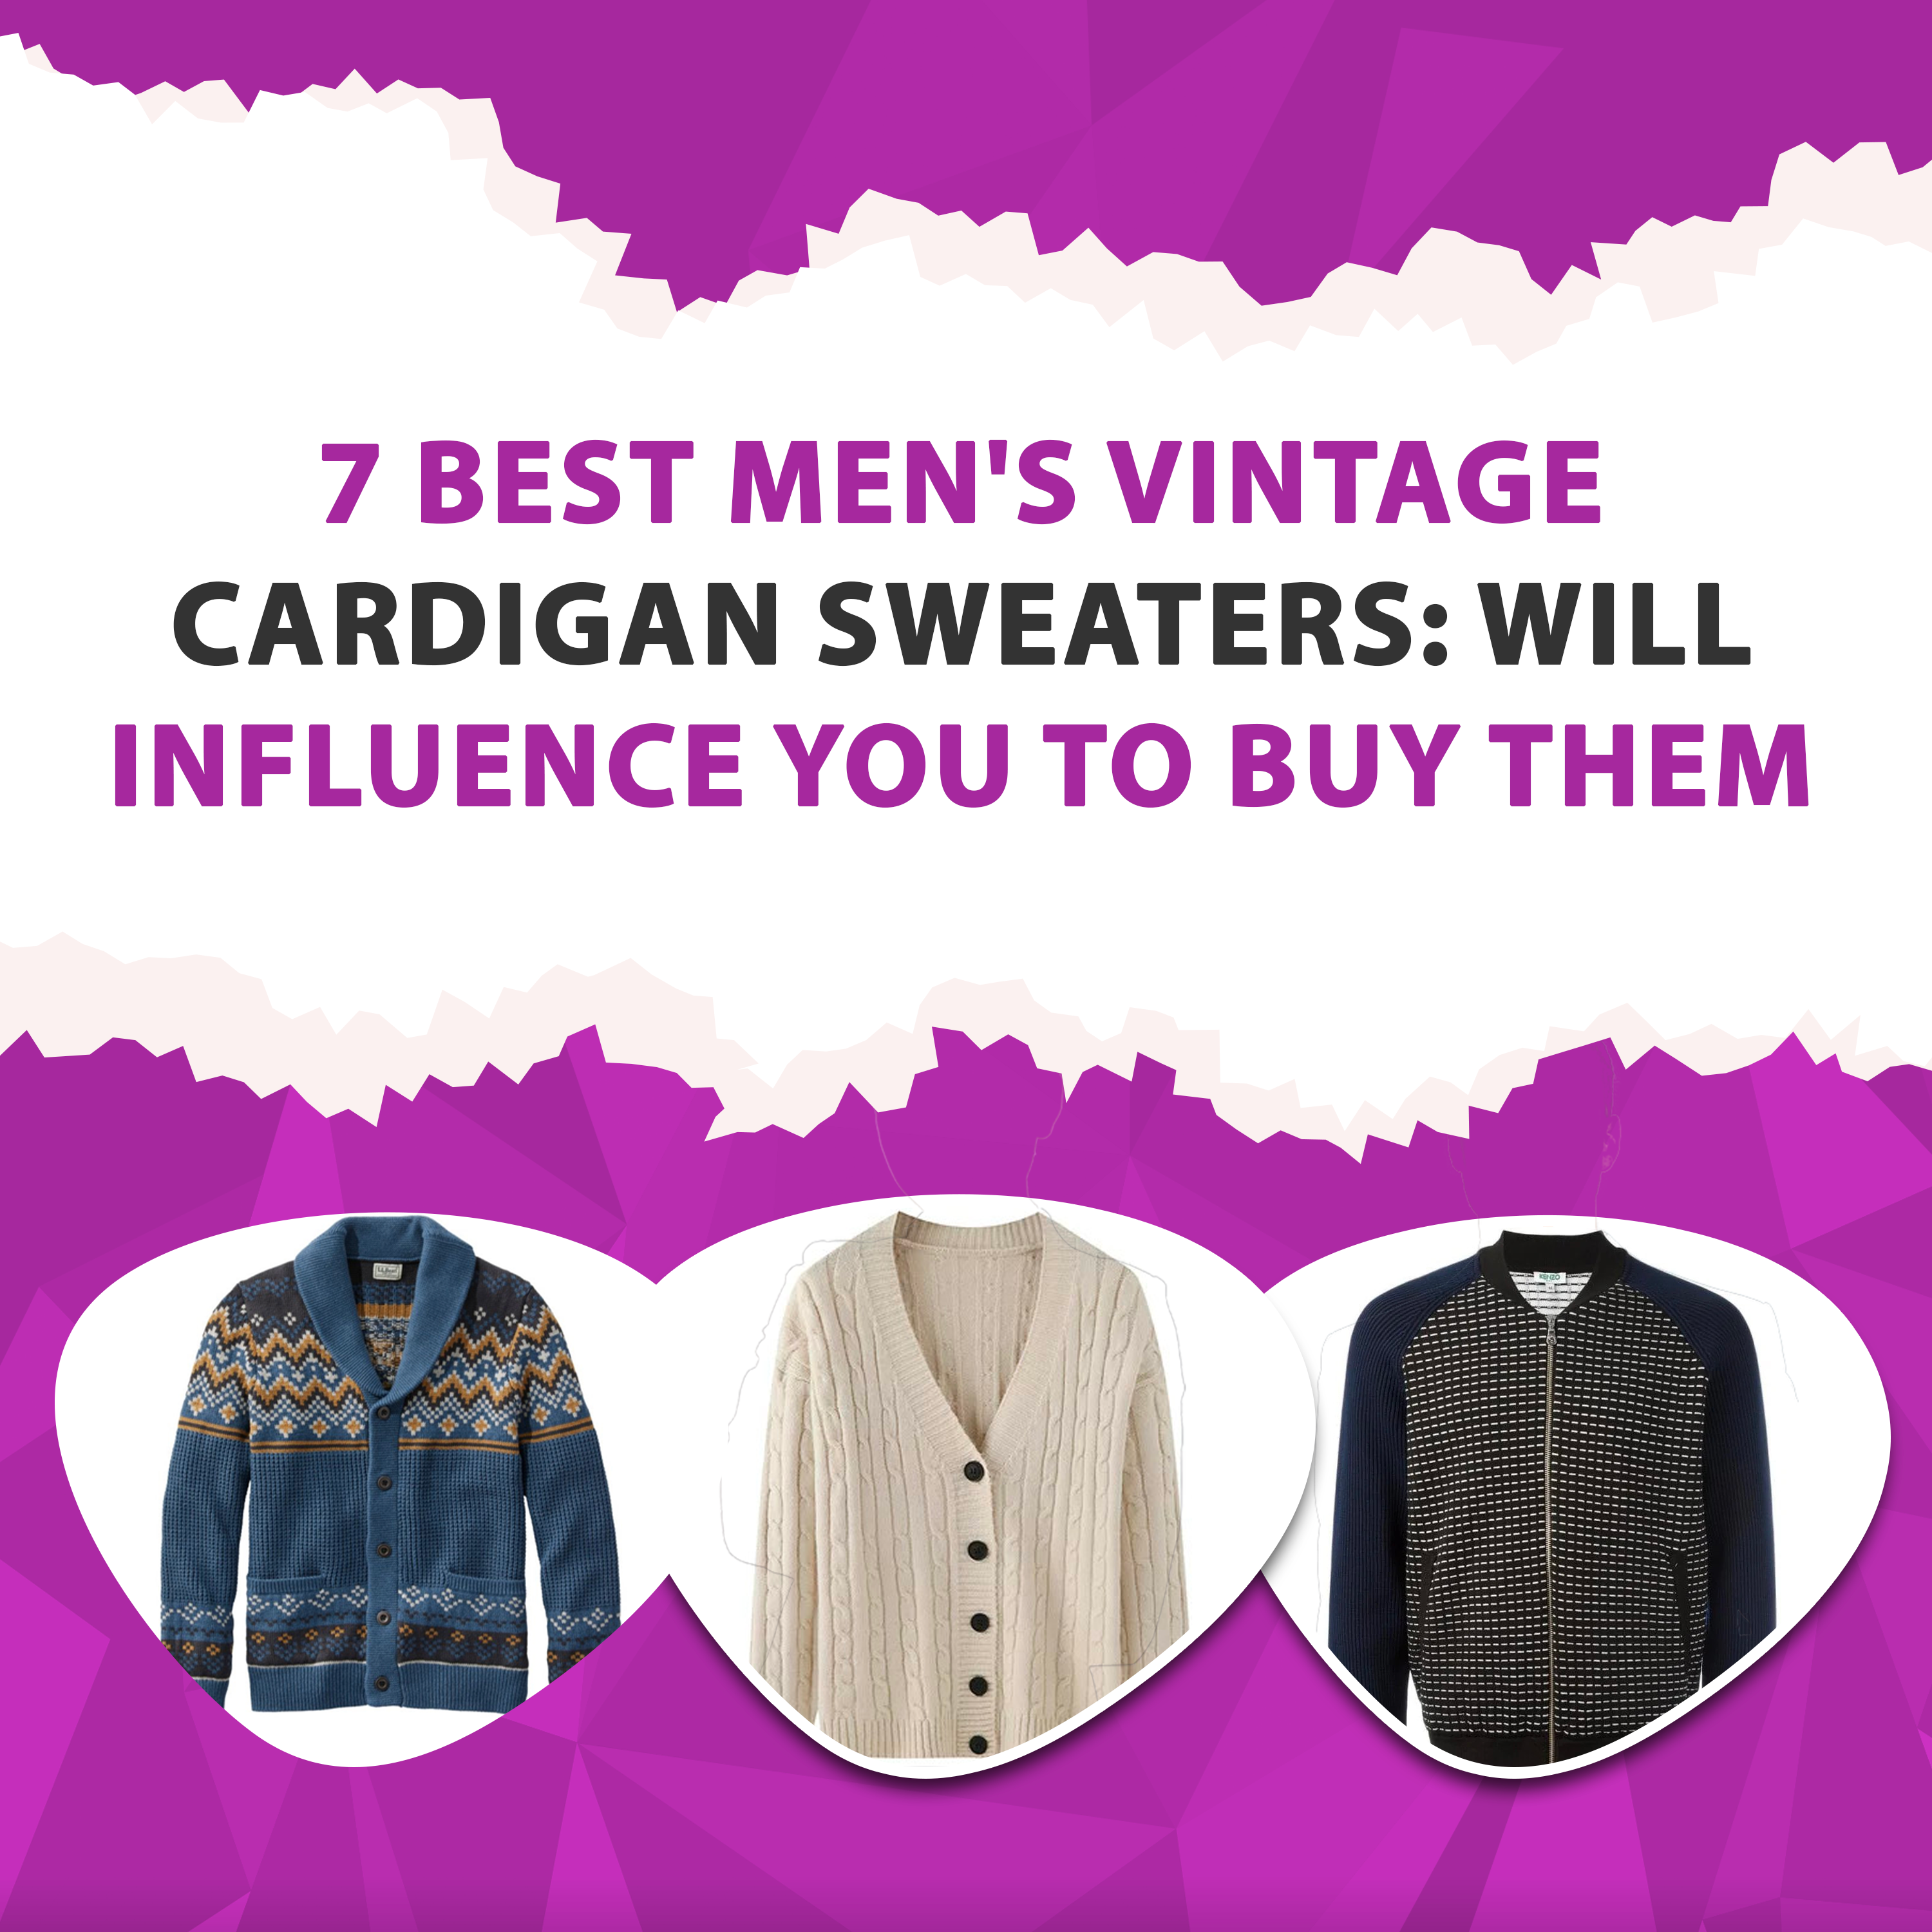 7 Best Men’s Vintage Cardigan Sweaters: Will Influence You To Buy Them